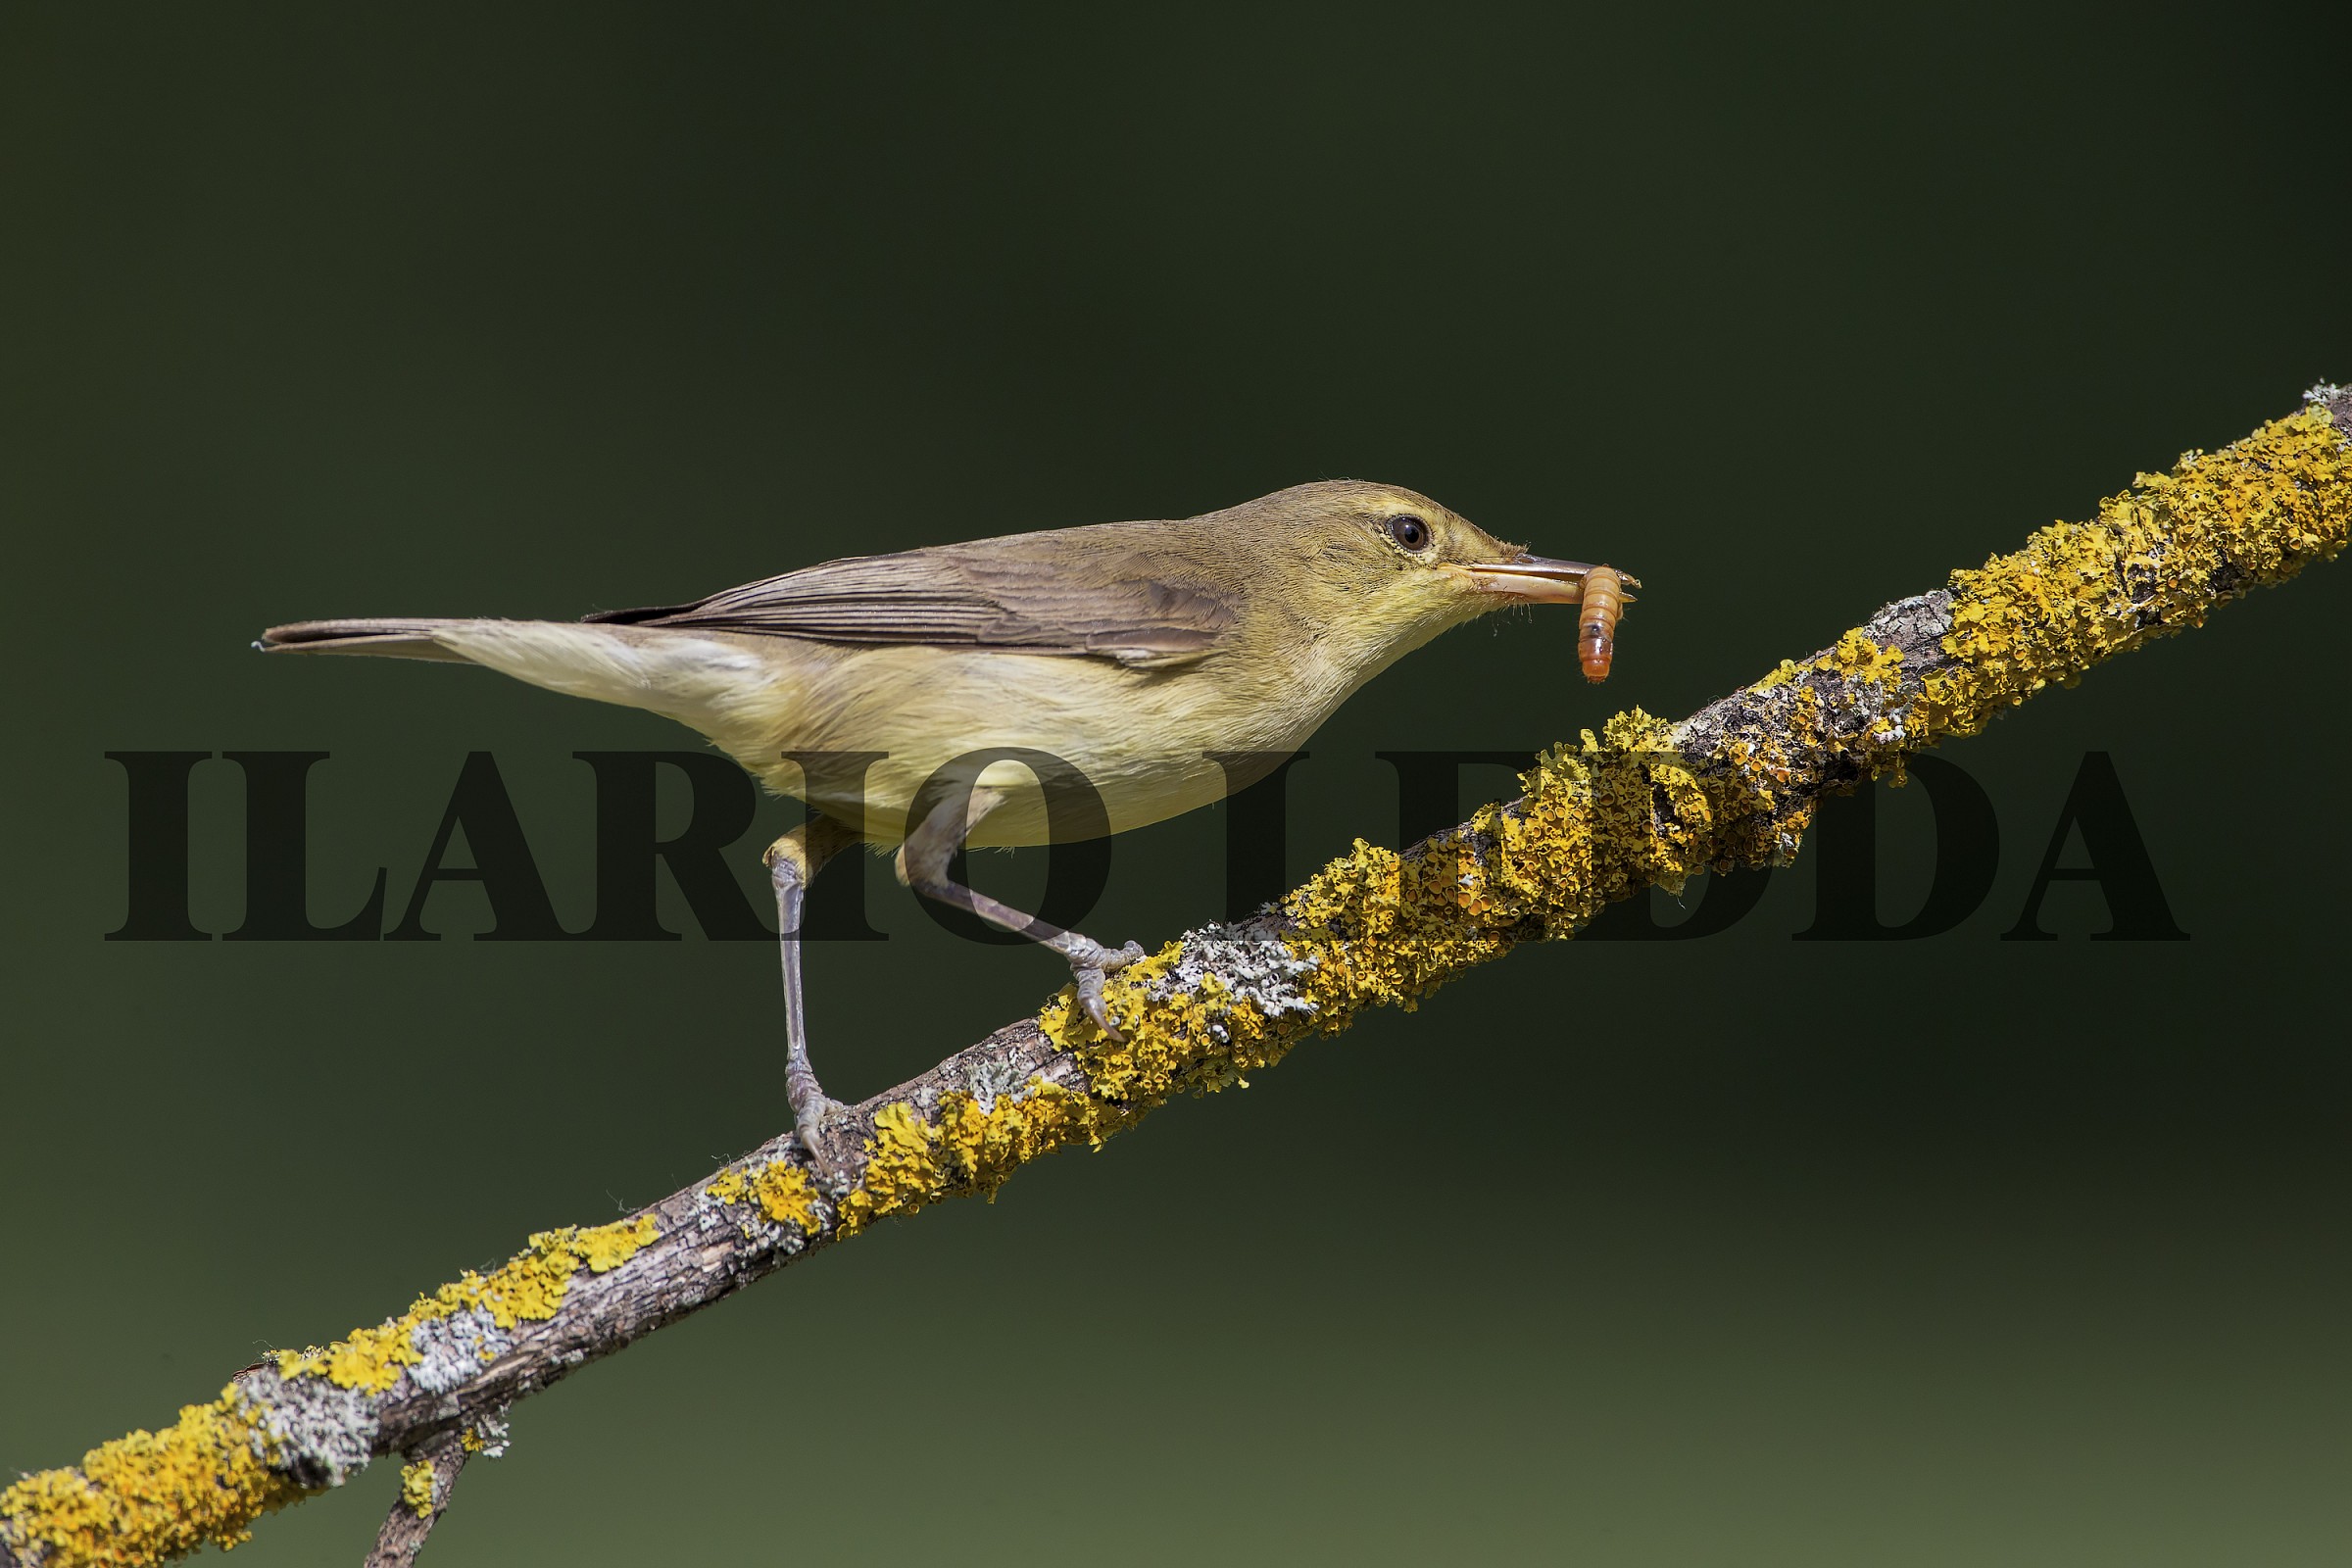 Melodious Warbler...